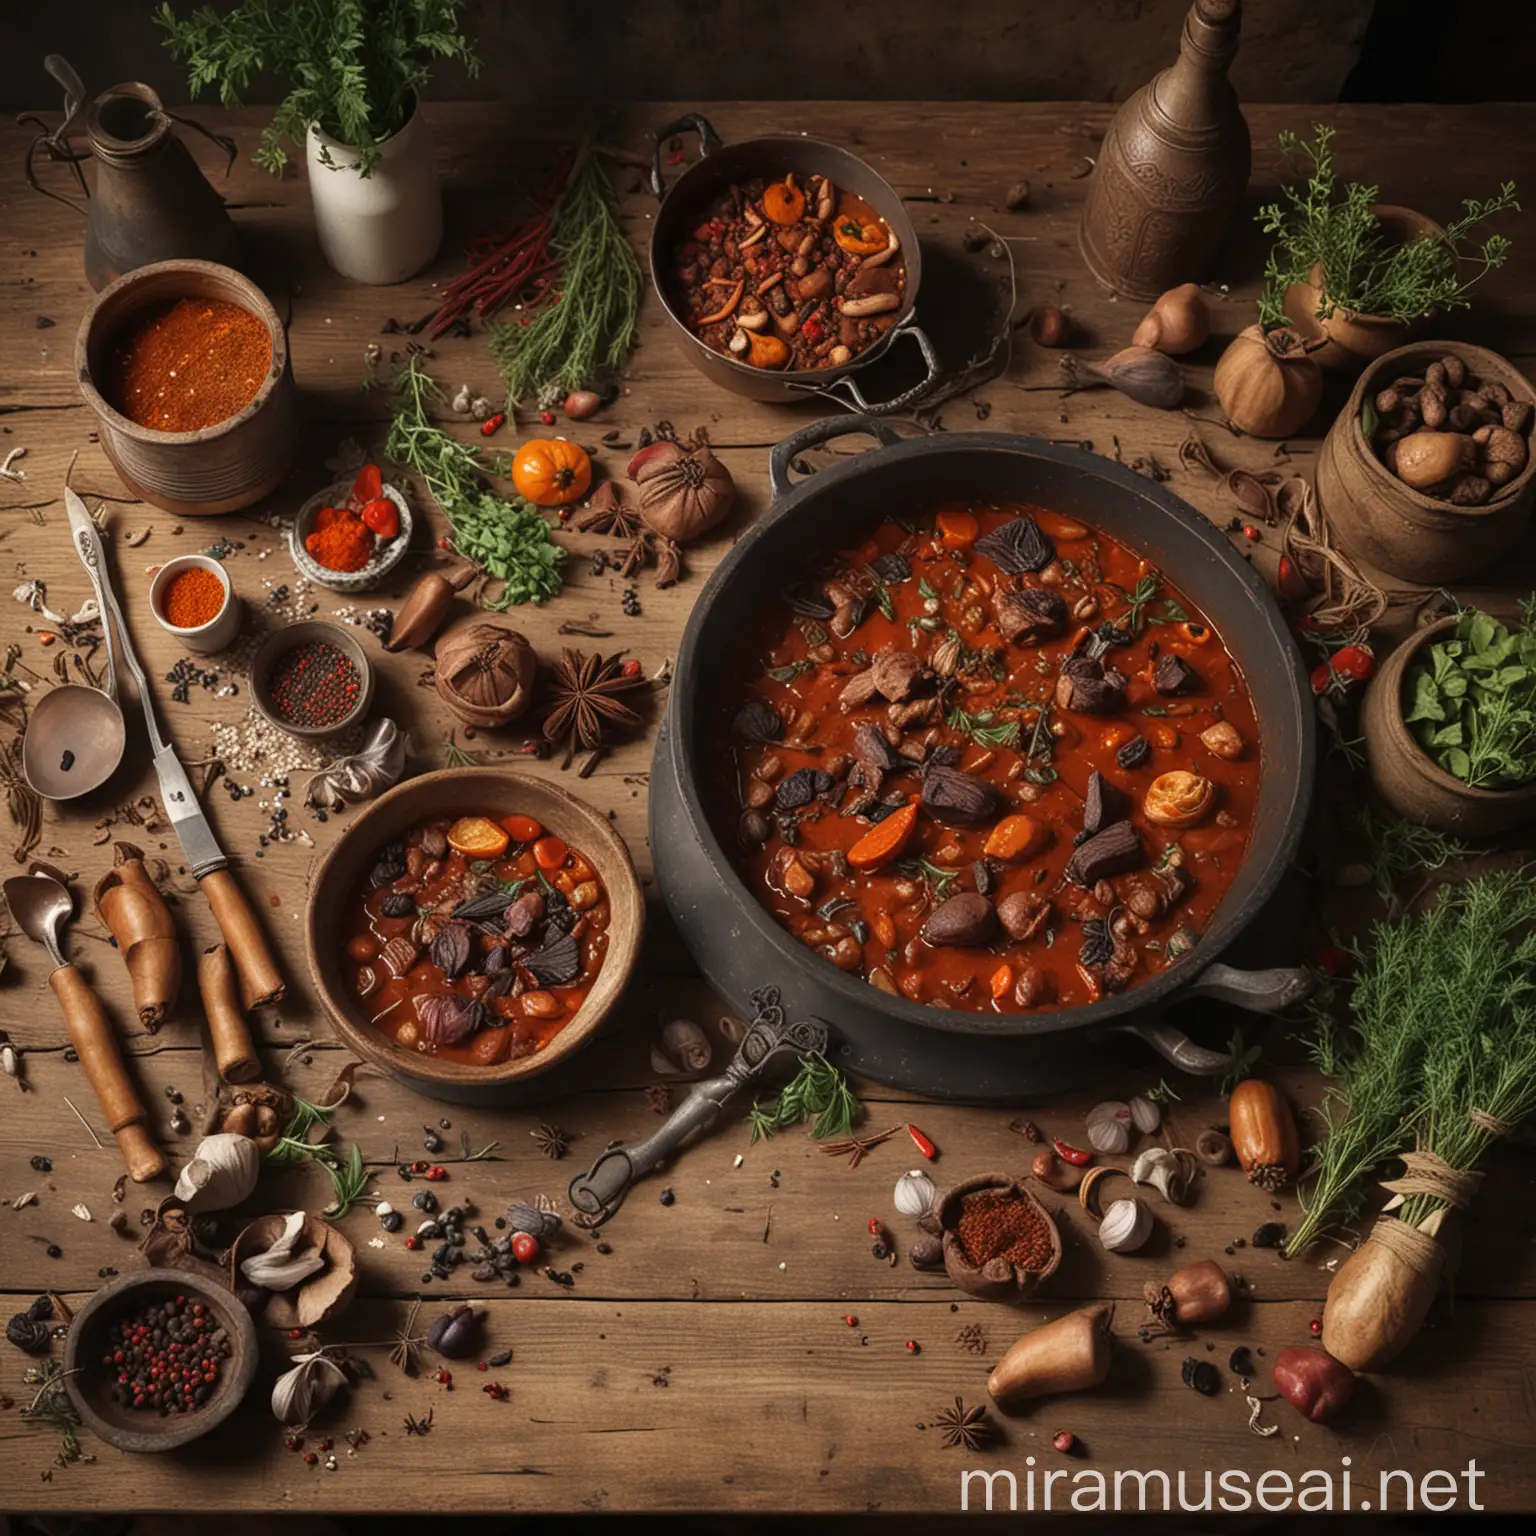 gambo stew and marie laveau cooking it, rustic bohemian kitchen, spices and herbs on table, hyper realictic, 4d